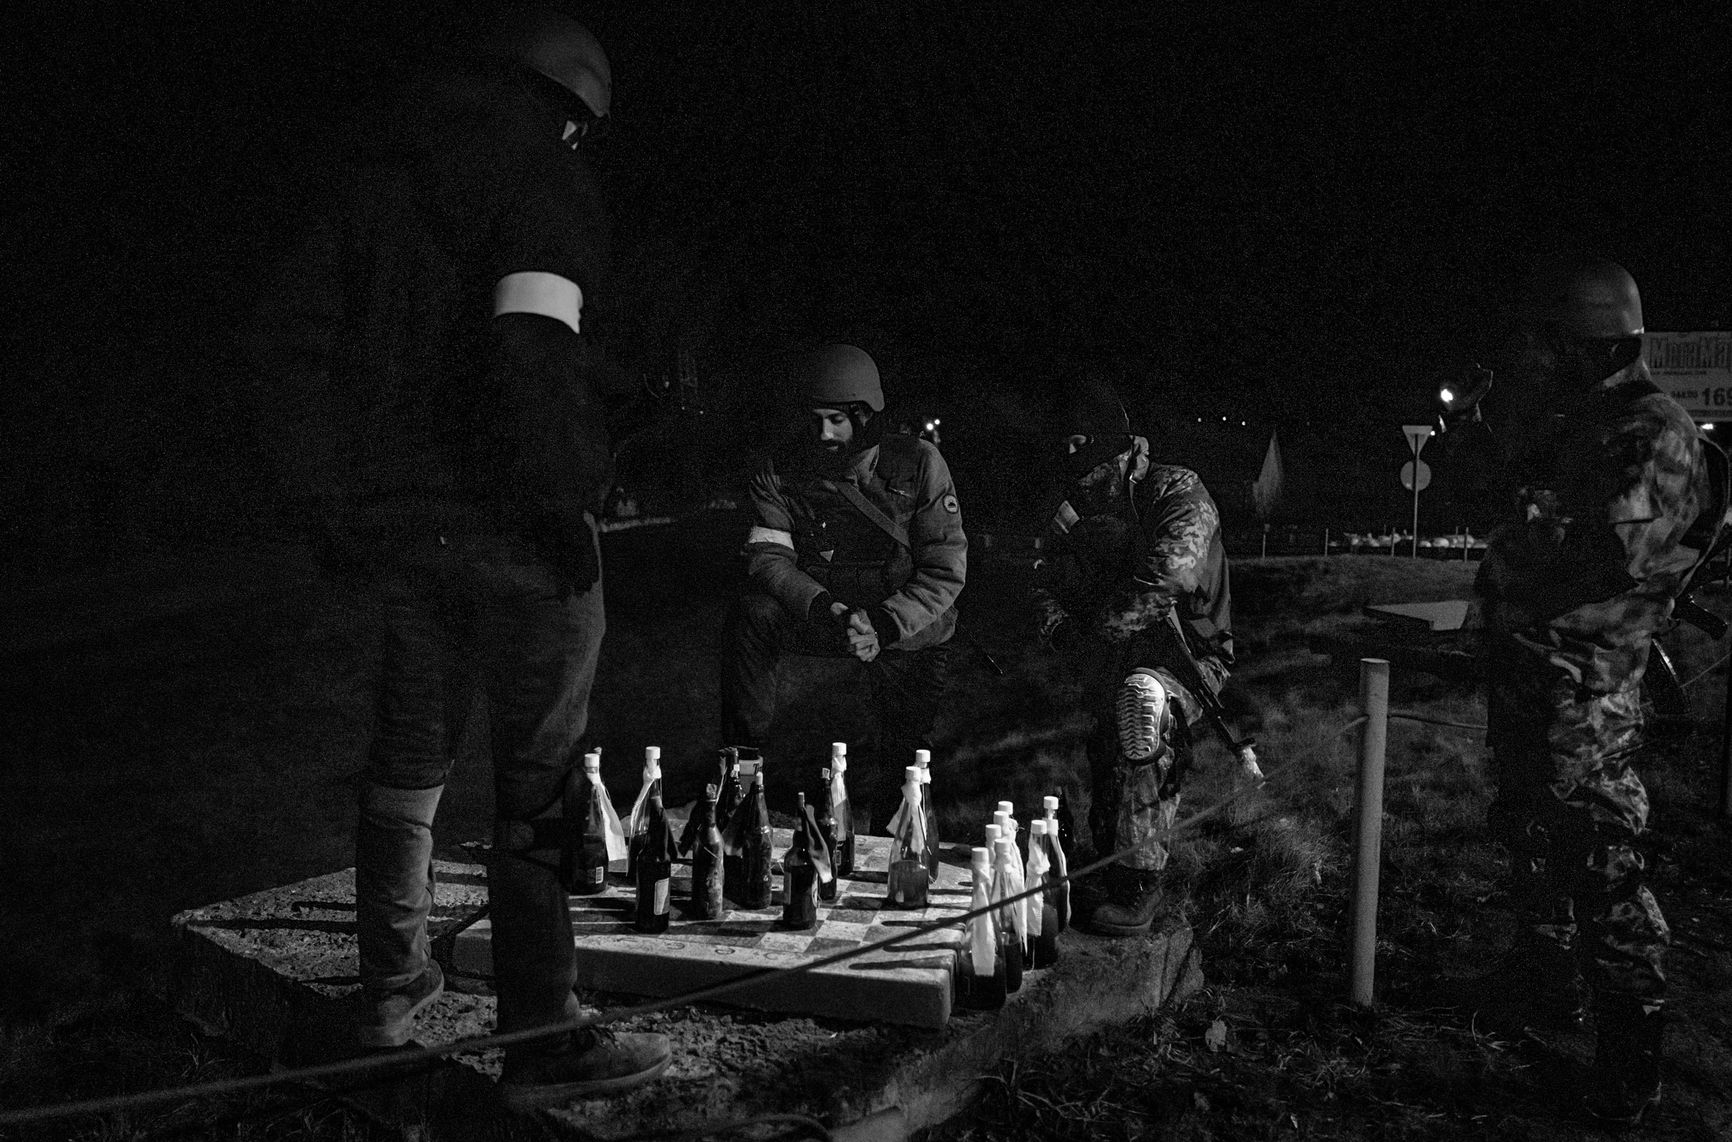 Members the Territorial Defense Forces who guard a large checkpoint briefly played a game of checkers with Molotov cocktails, as seen on the eastern outskirts of Kyiv, Ukraine, on March 5. With few vehicles passing because of the nighttime curfew, Territorial Defense members can have a moment of quiet while remaining on high alert for any suspicious activity.